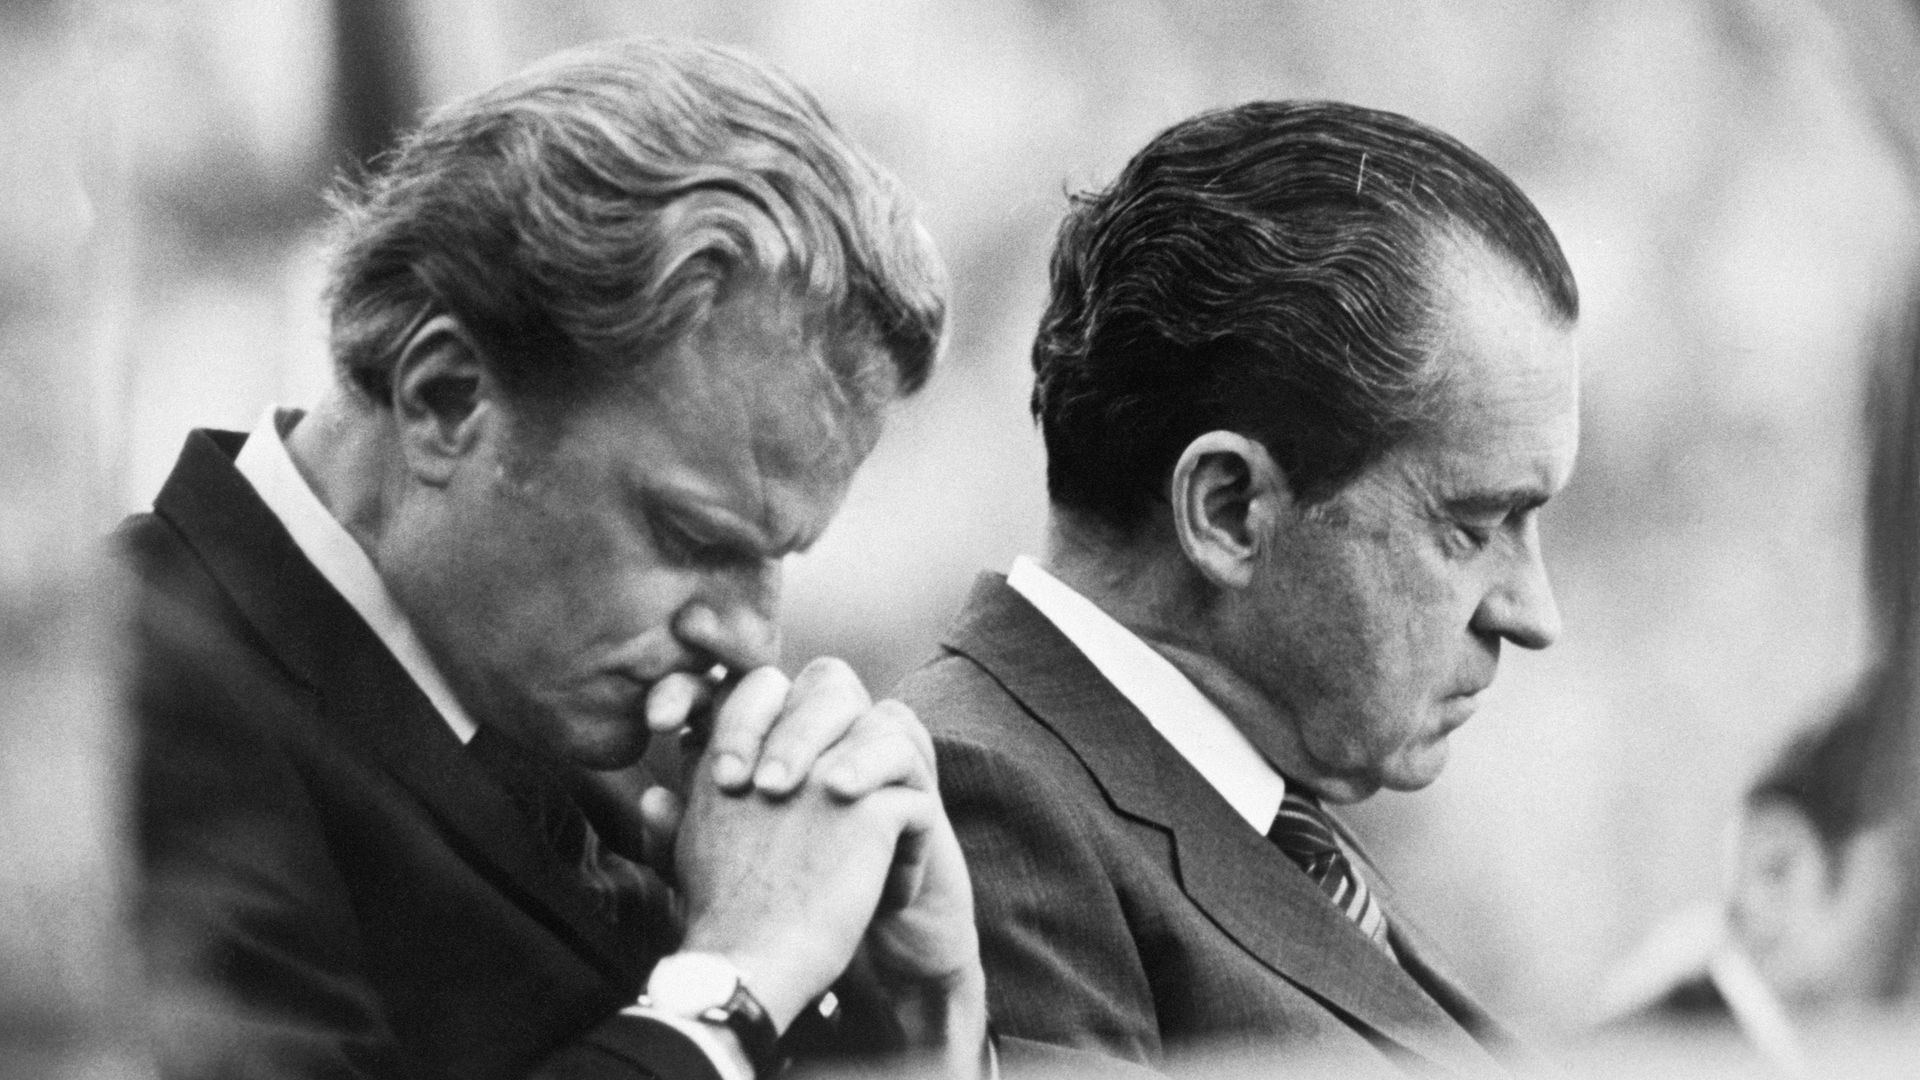 Graham and Nixon bow their heads in prayer